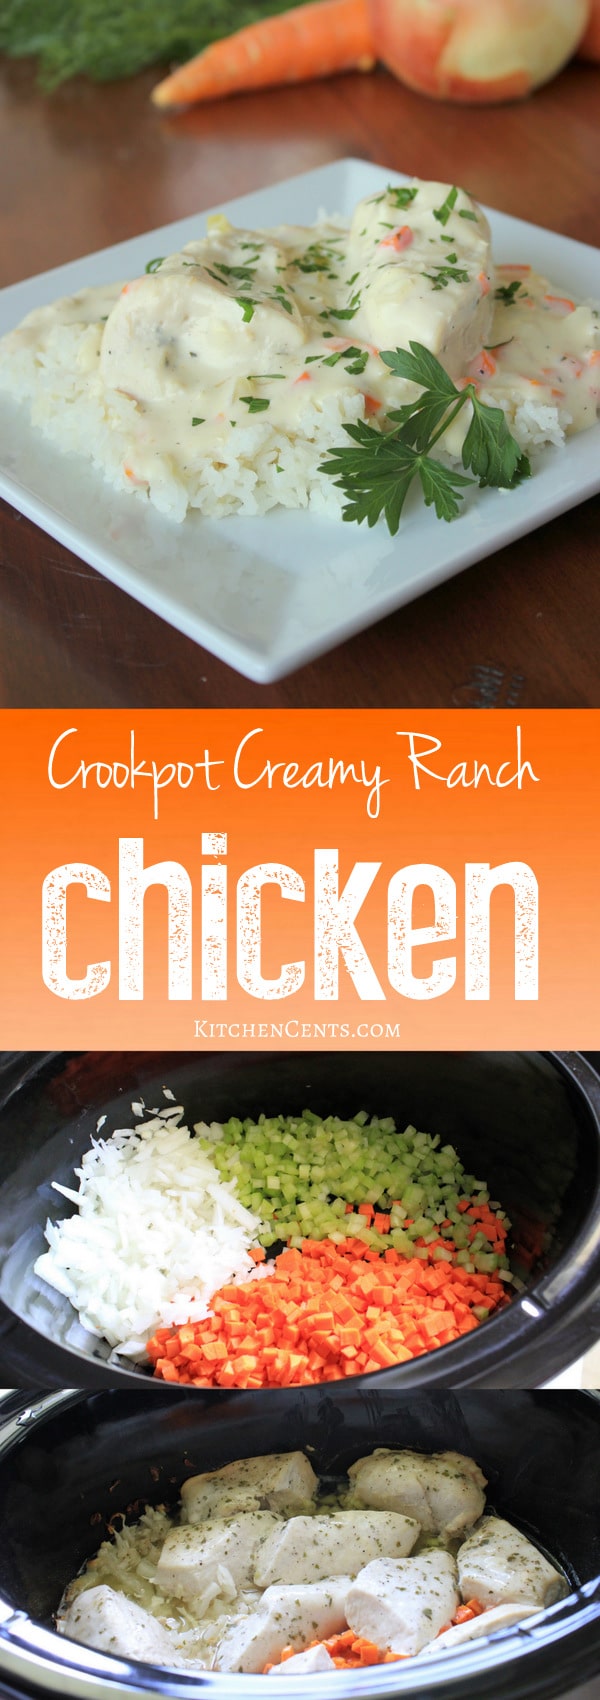 crookpot-creamy-ranch-chicken-with-rice | KitchenCents.com